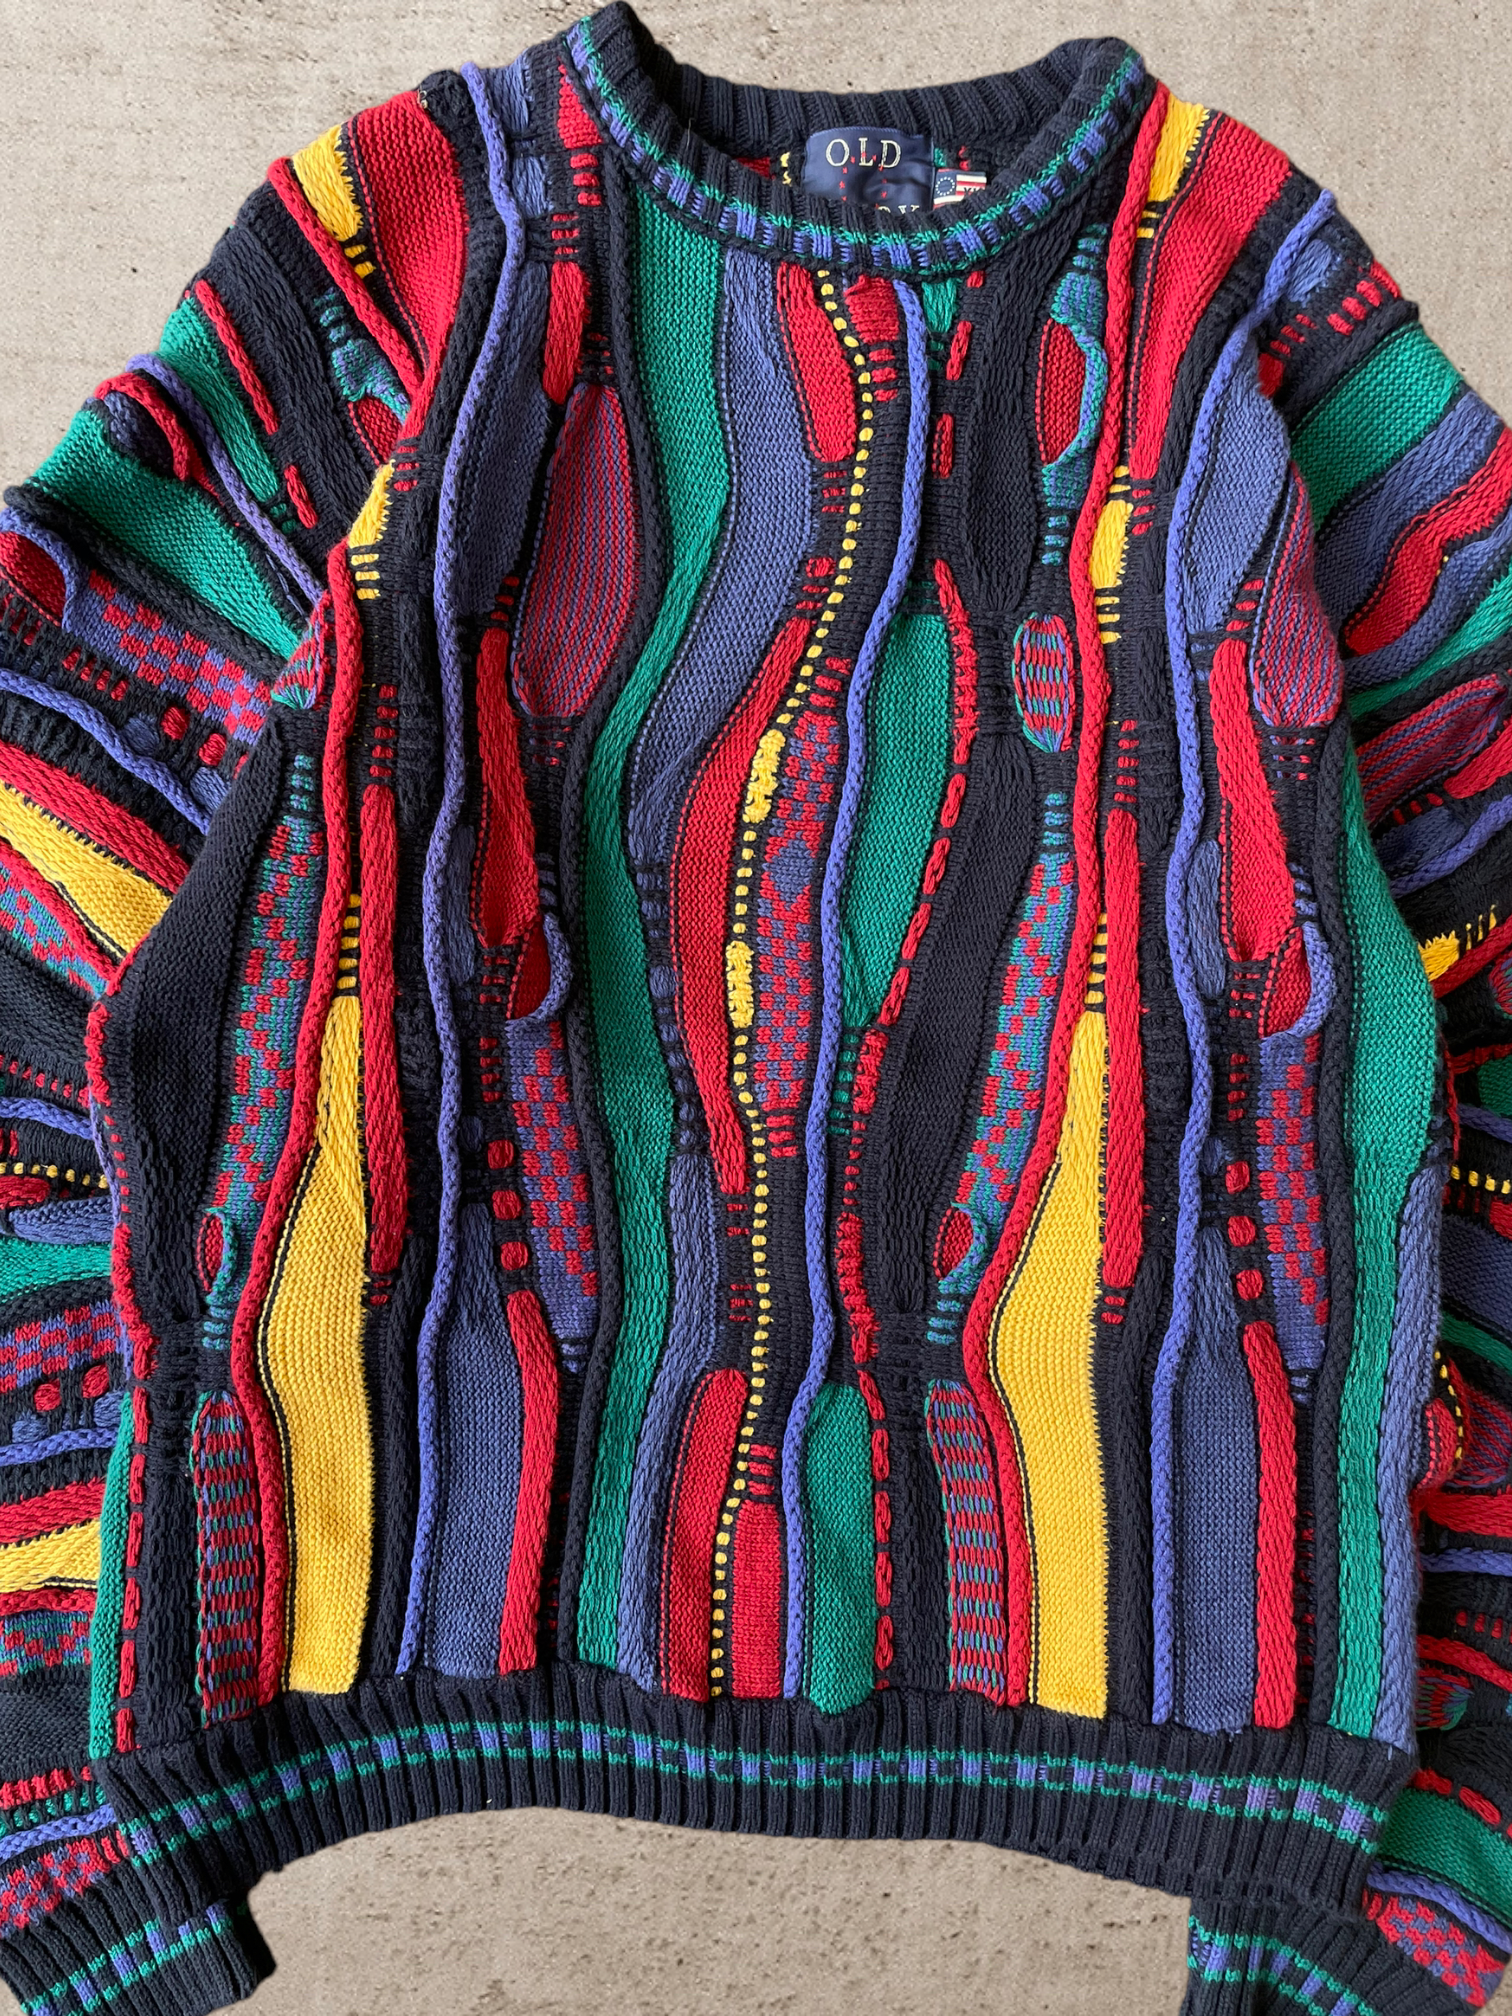 90s Multicolor Intricate Knit Sweater - X-Large